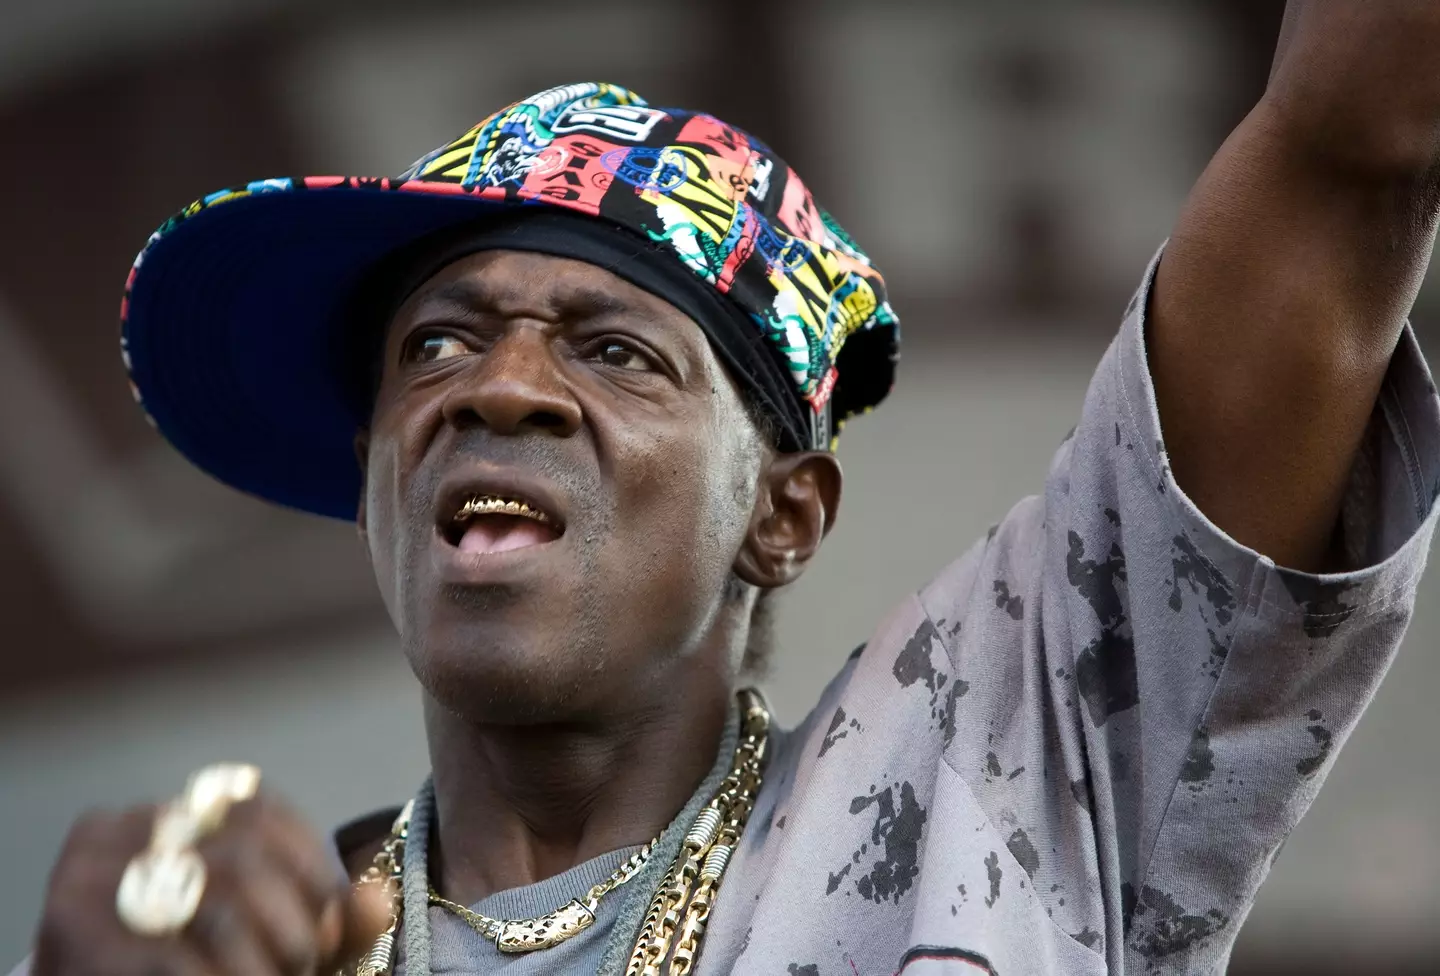 Flavor Flav has opened up on his battle with crack cocaine addiction.